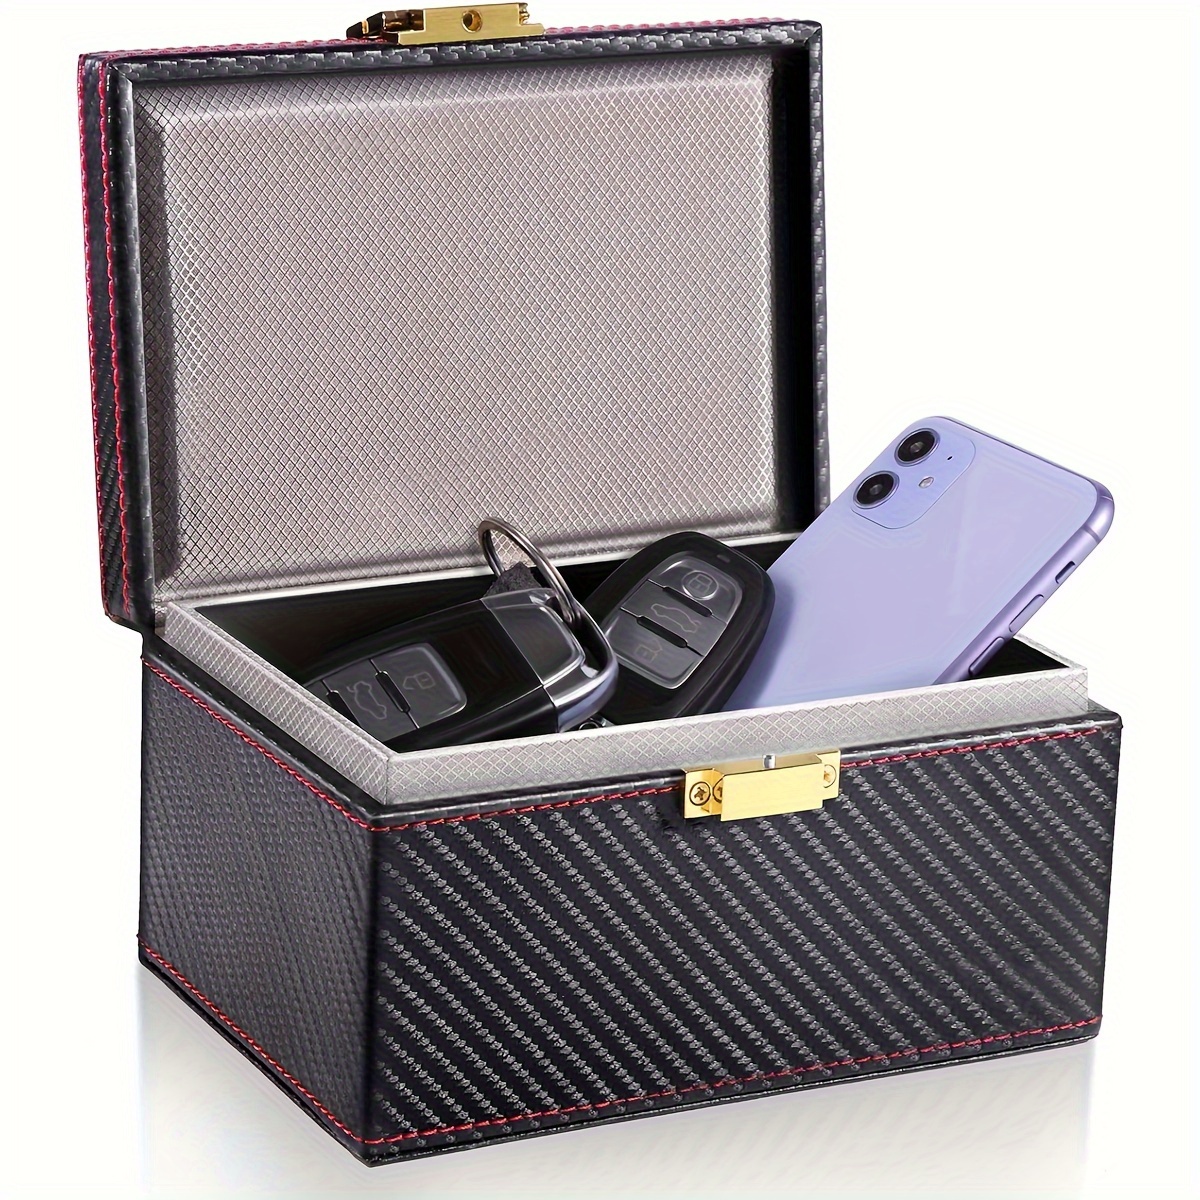 Faraday cage safe box to shield remote car keys and cell phones